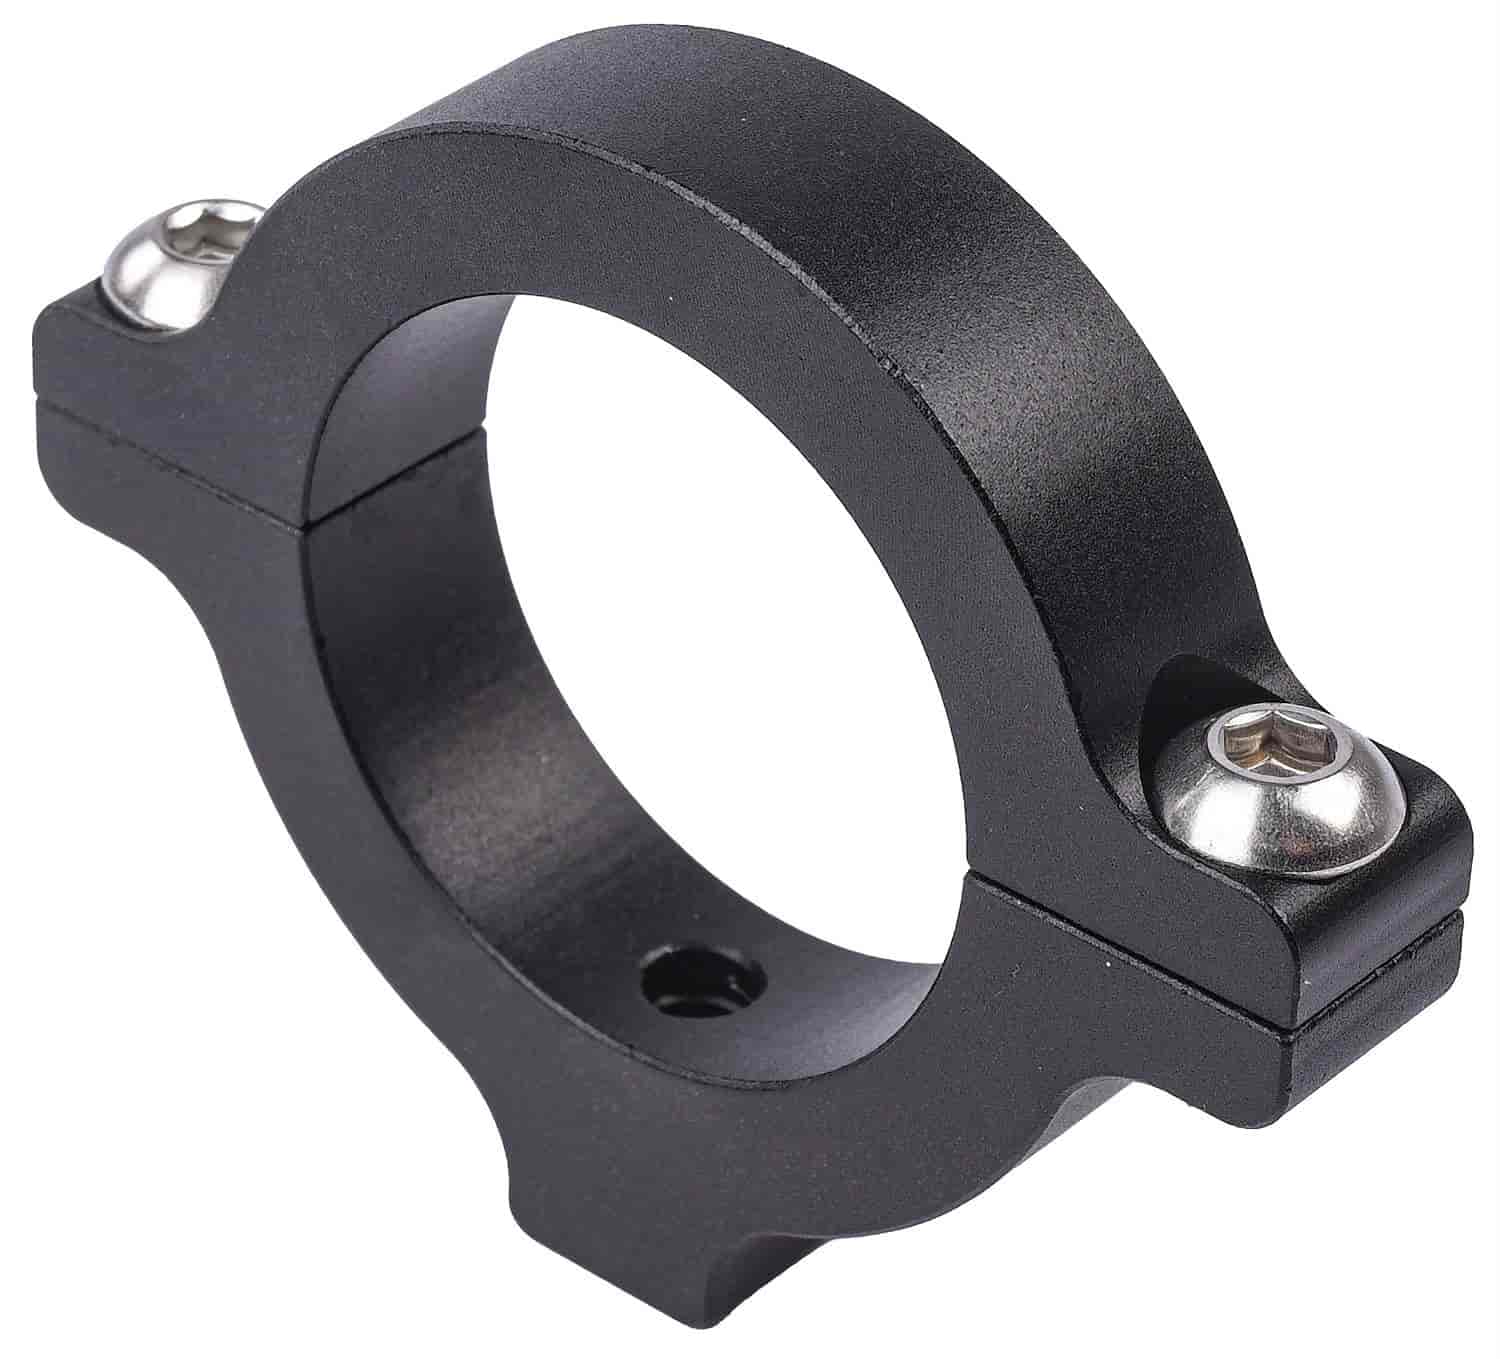 Roll Bar Accessory Clamp For 1.500 in. O.D. Tubing